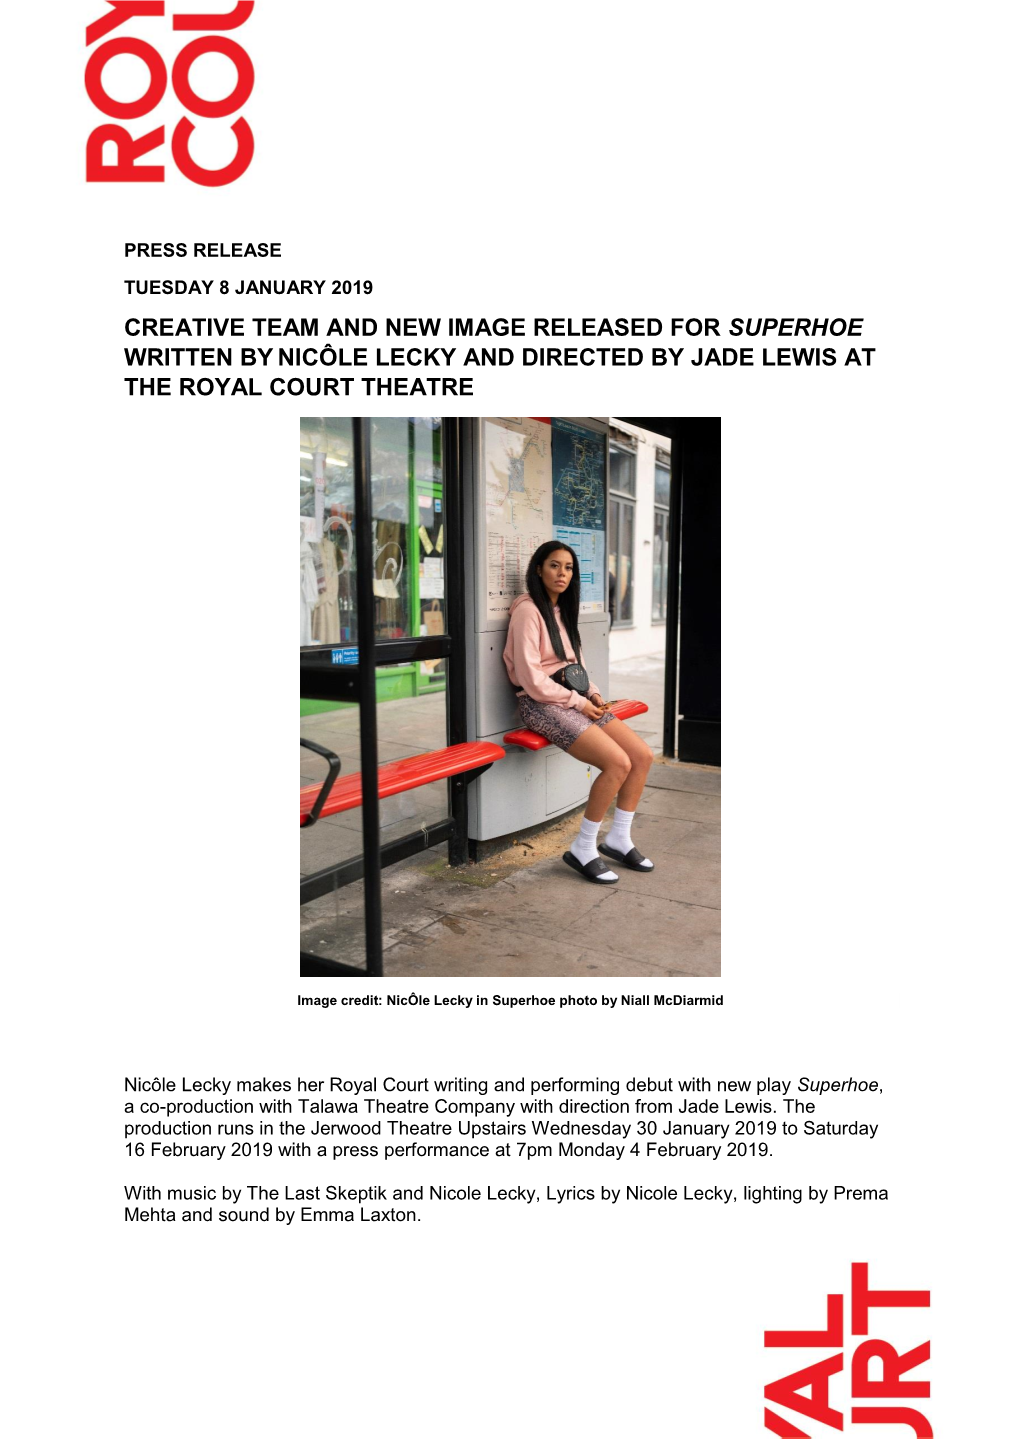 Creative Team and New Image Released for Superhoe Written Bynicôle Lecky and Directed by Jade Lewis at the Royal Court Theatre